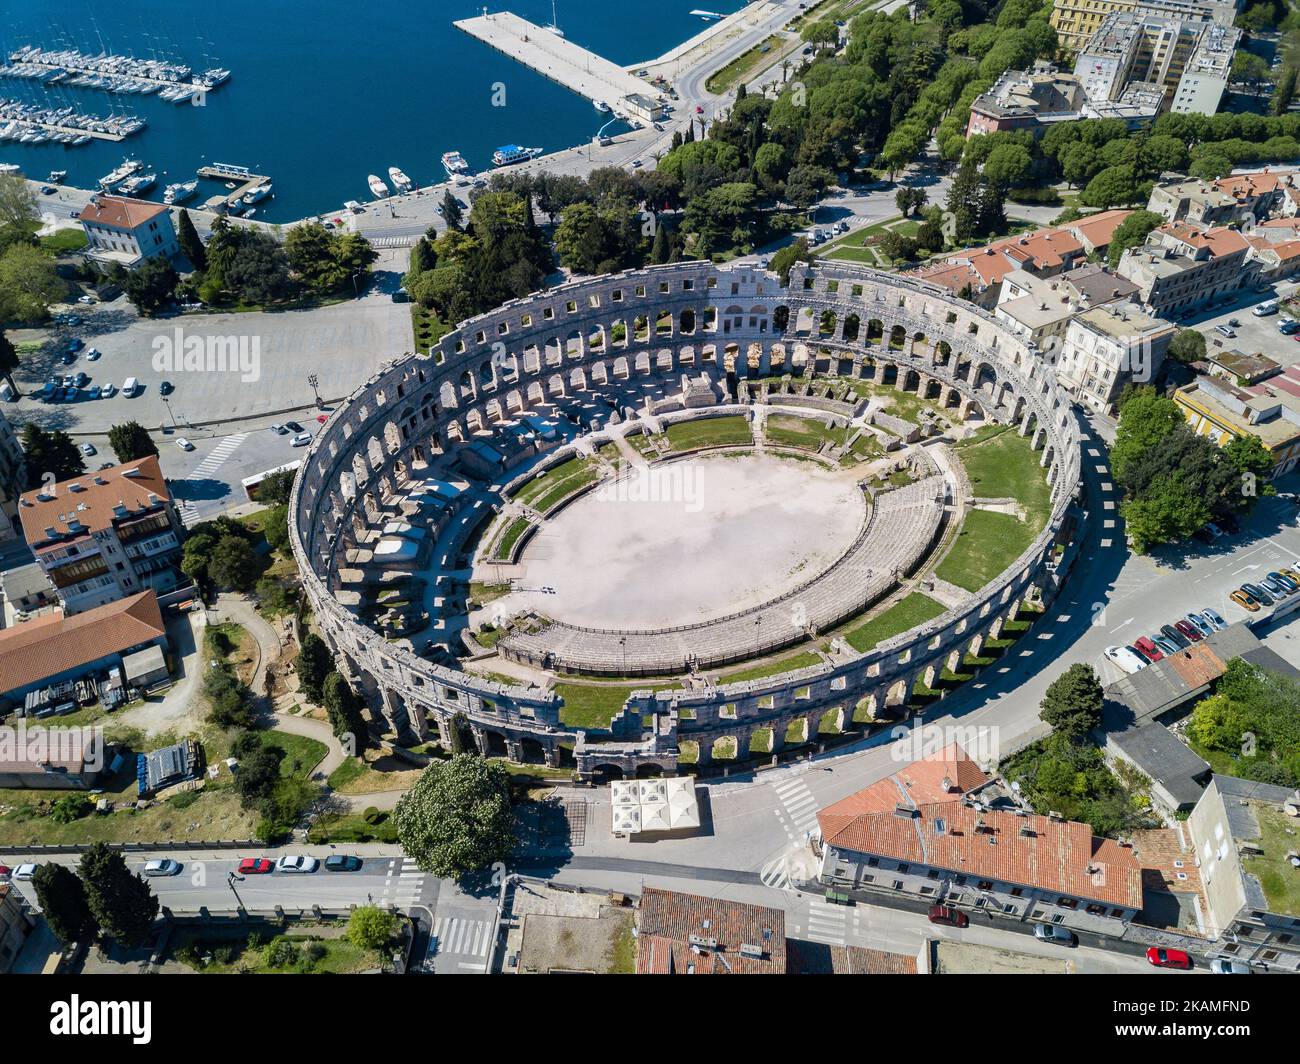 An aerial shot of the Pula arena building in Croatia Stock Photo